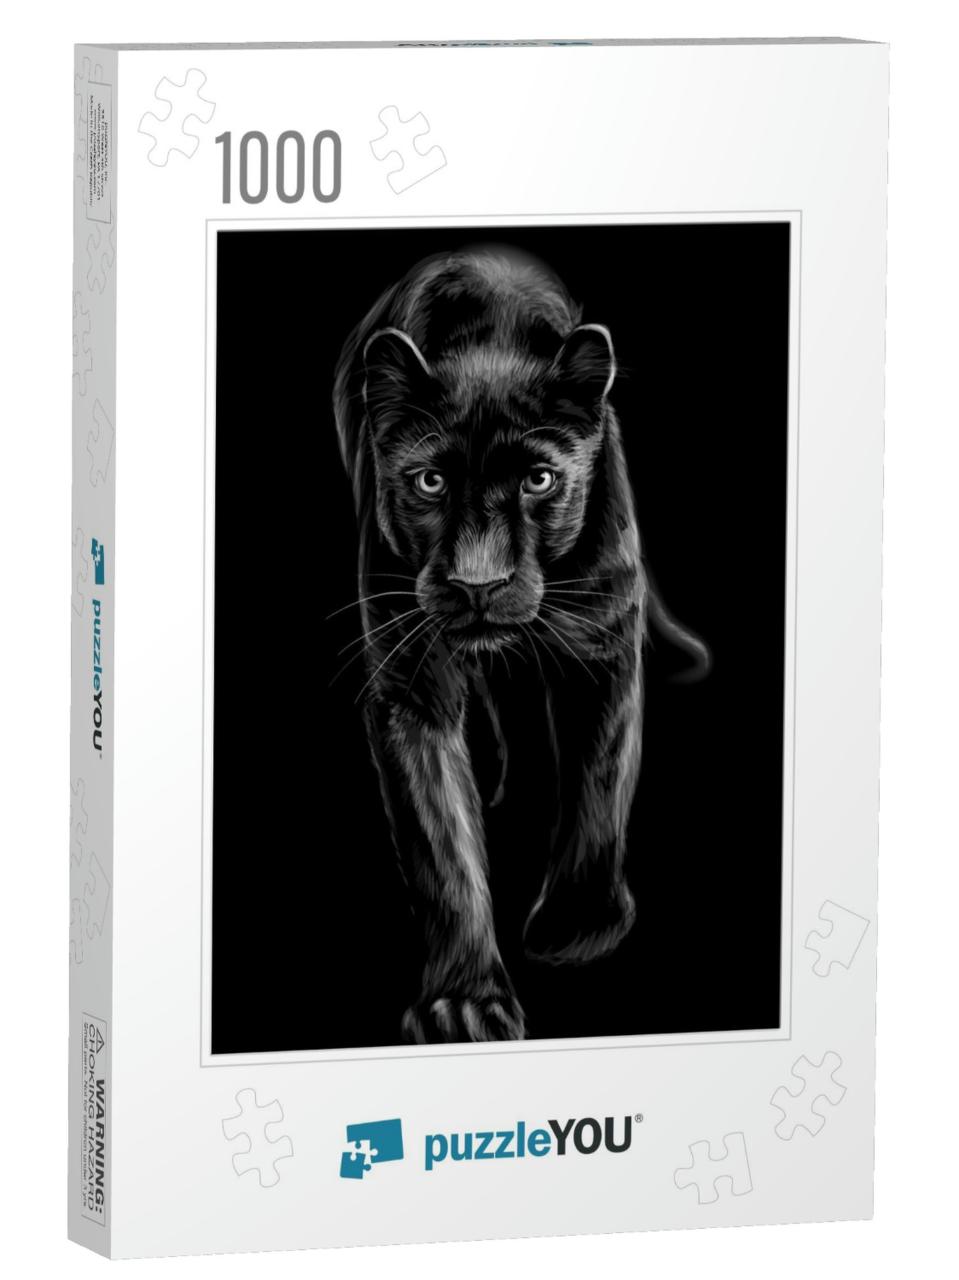 Panther. Artistic, Sketchy, Black & White Portrait of a W... Jigsaw Puzzle with 1000 pieces